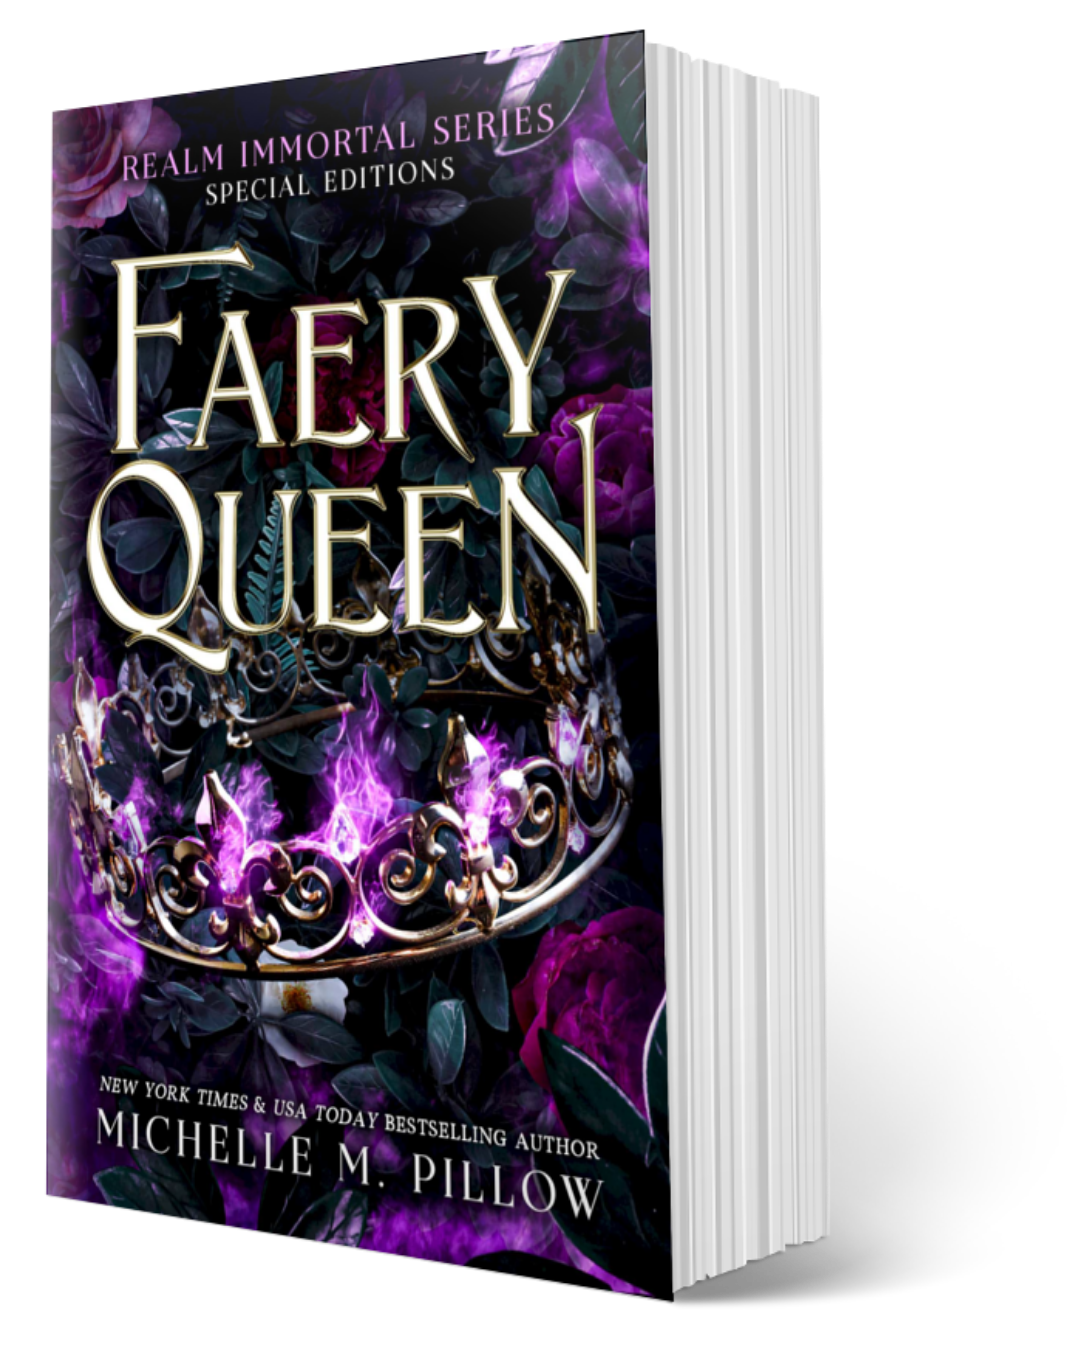 SIGNED PRINT: Faery Queen